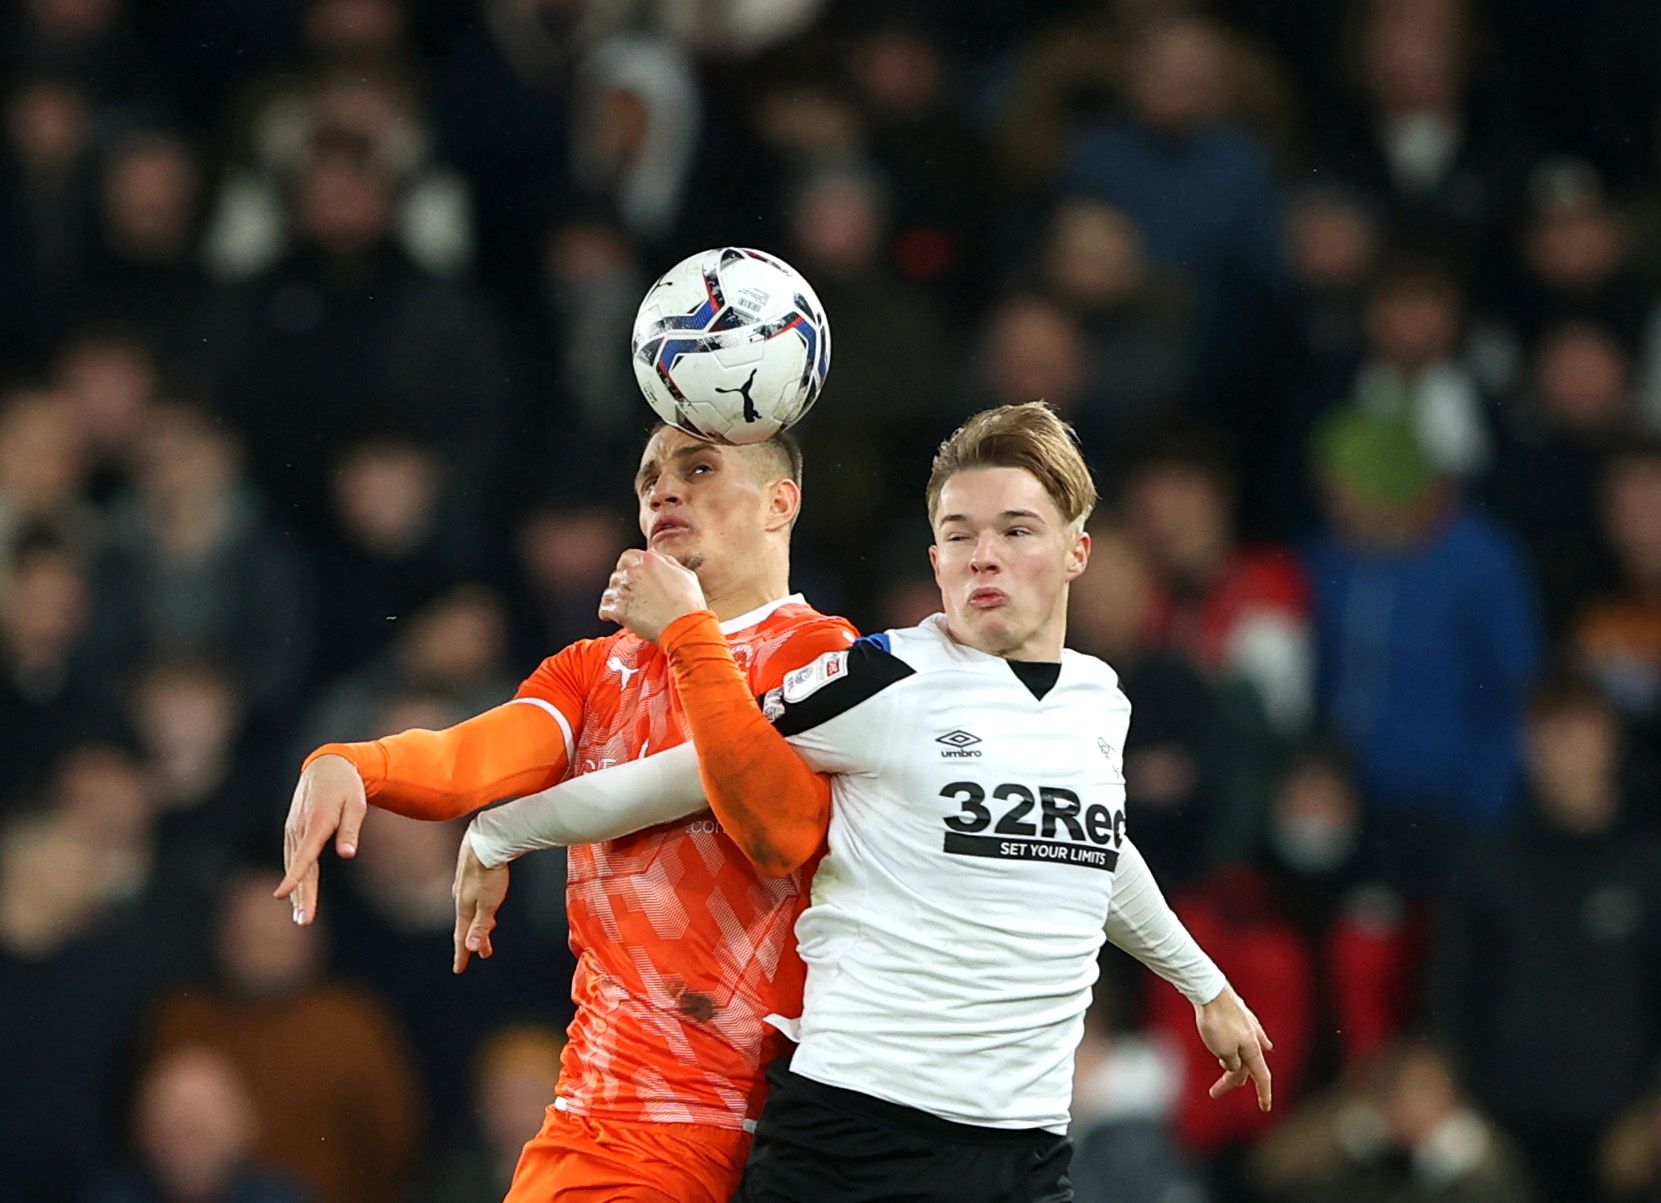 Soccer Football - Championship - Derby County v Blackpool - Pride Park, Derby, Britain - December 11, 2021  Derby County's Liam Thompson in action with Blackpool's Jerry Yates Action Images/Molly Darlington  EDITORIAL USE ONLY. No use with unauthorized audio, video, data, fixture lists, club/league logos or 